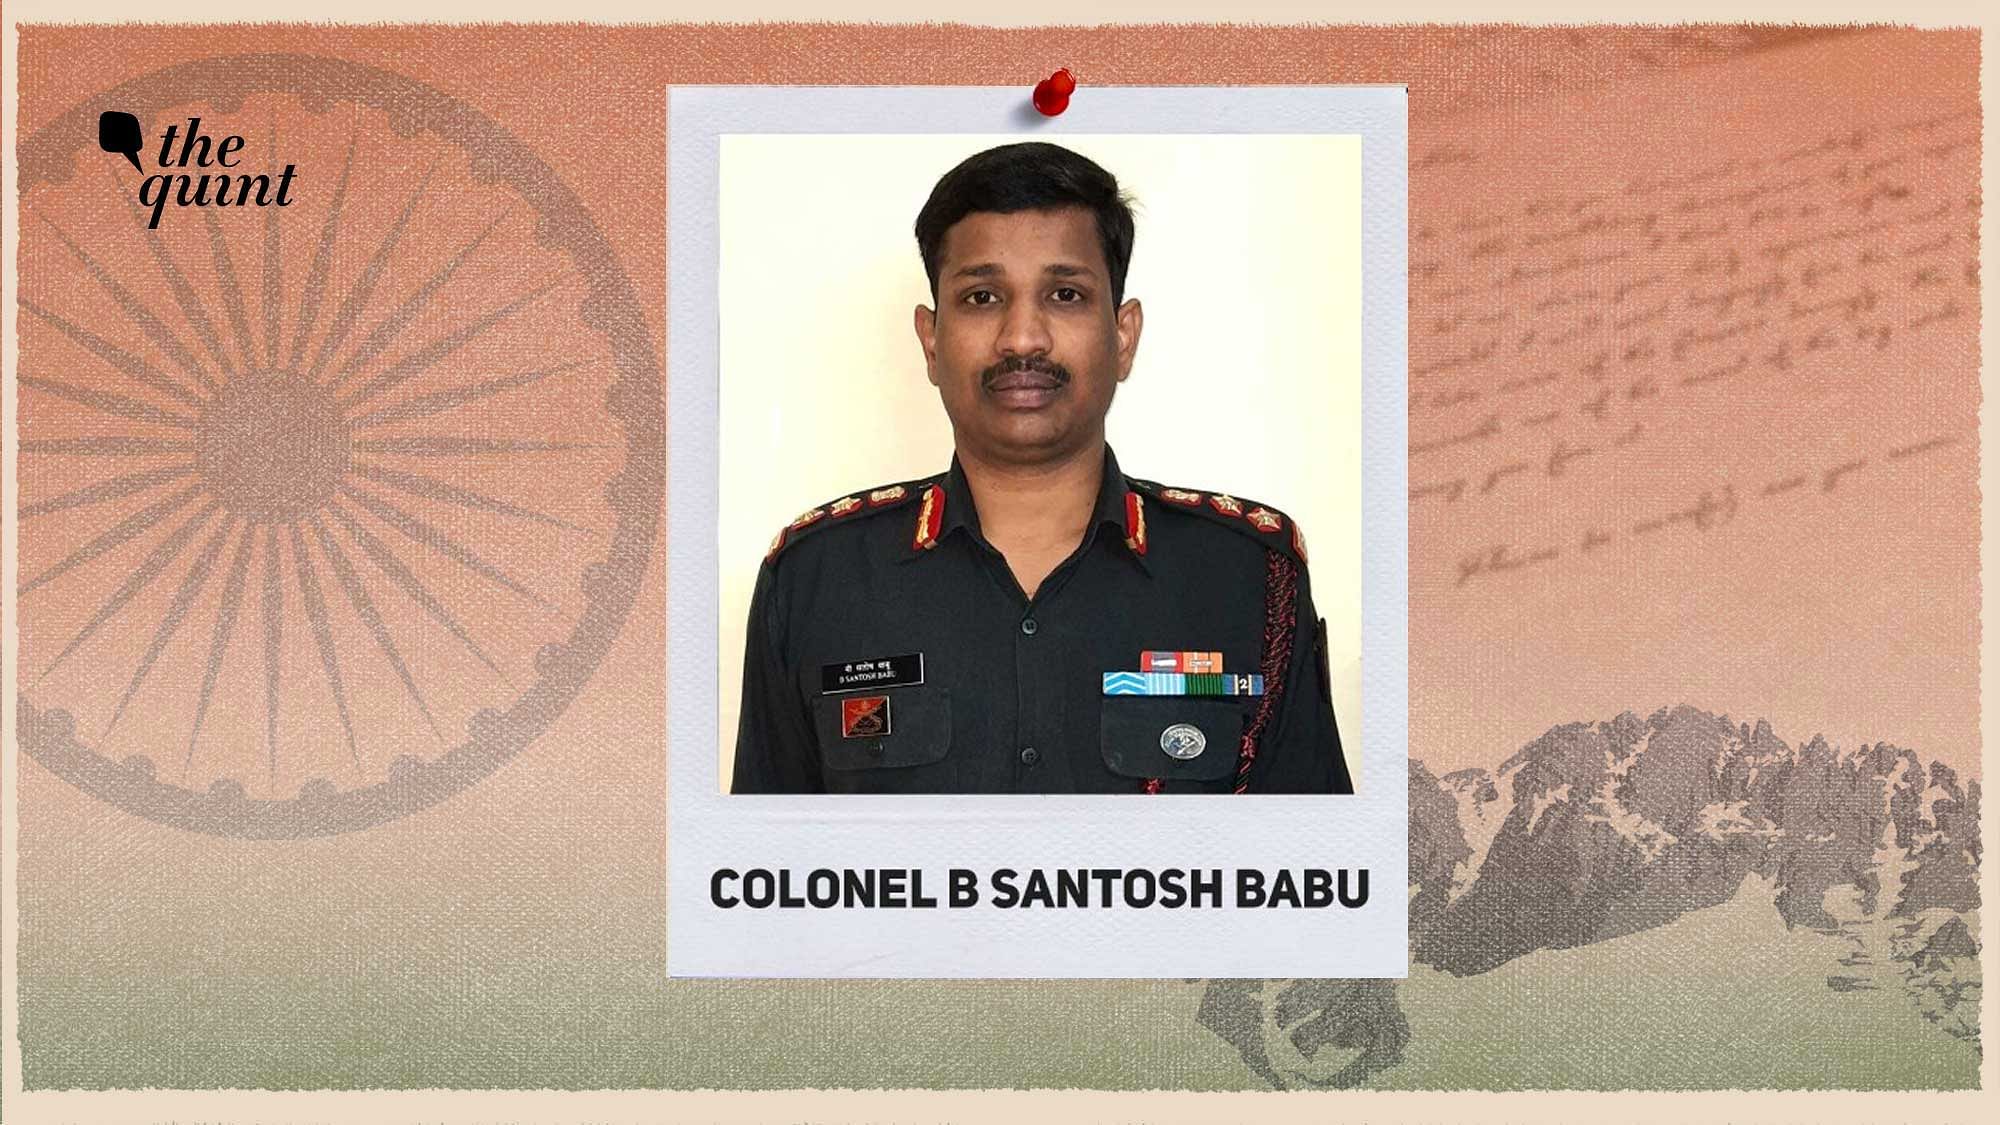 Commanding officer of 16 Bihar Regiment was killed on 15 June 2020 in a clash with Chinese soldiers at Galwan Valley.